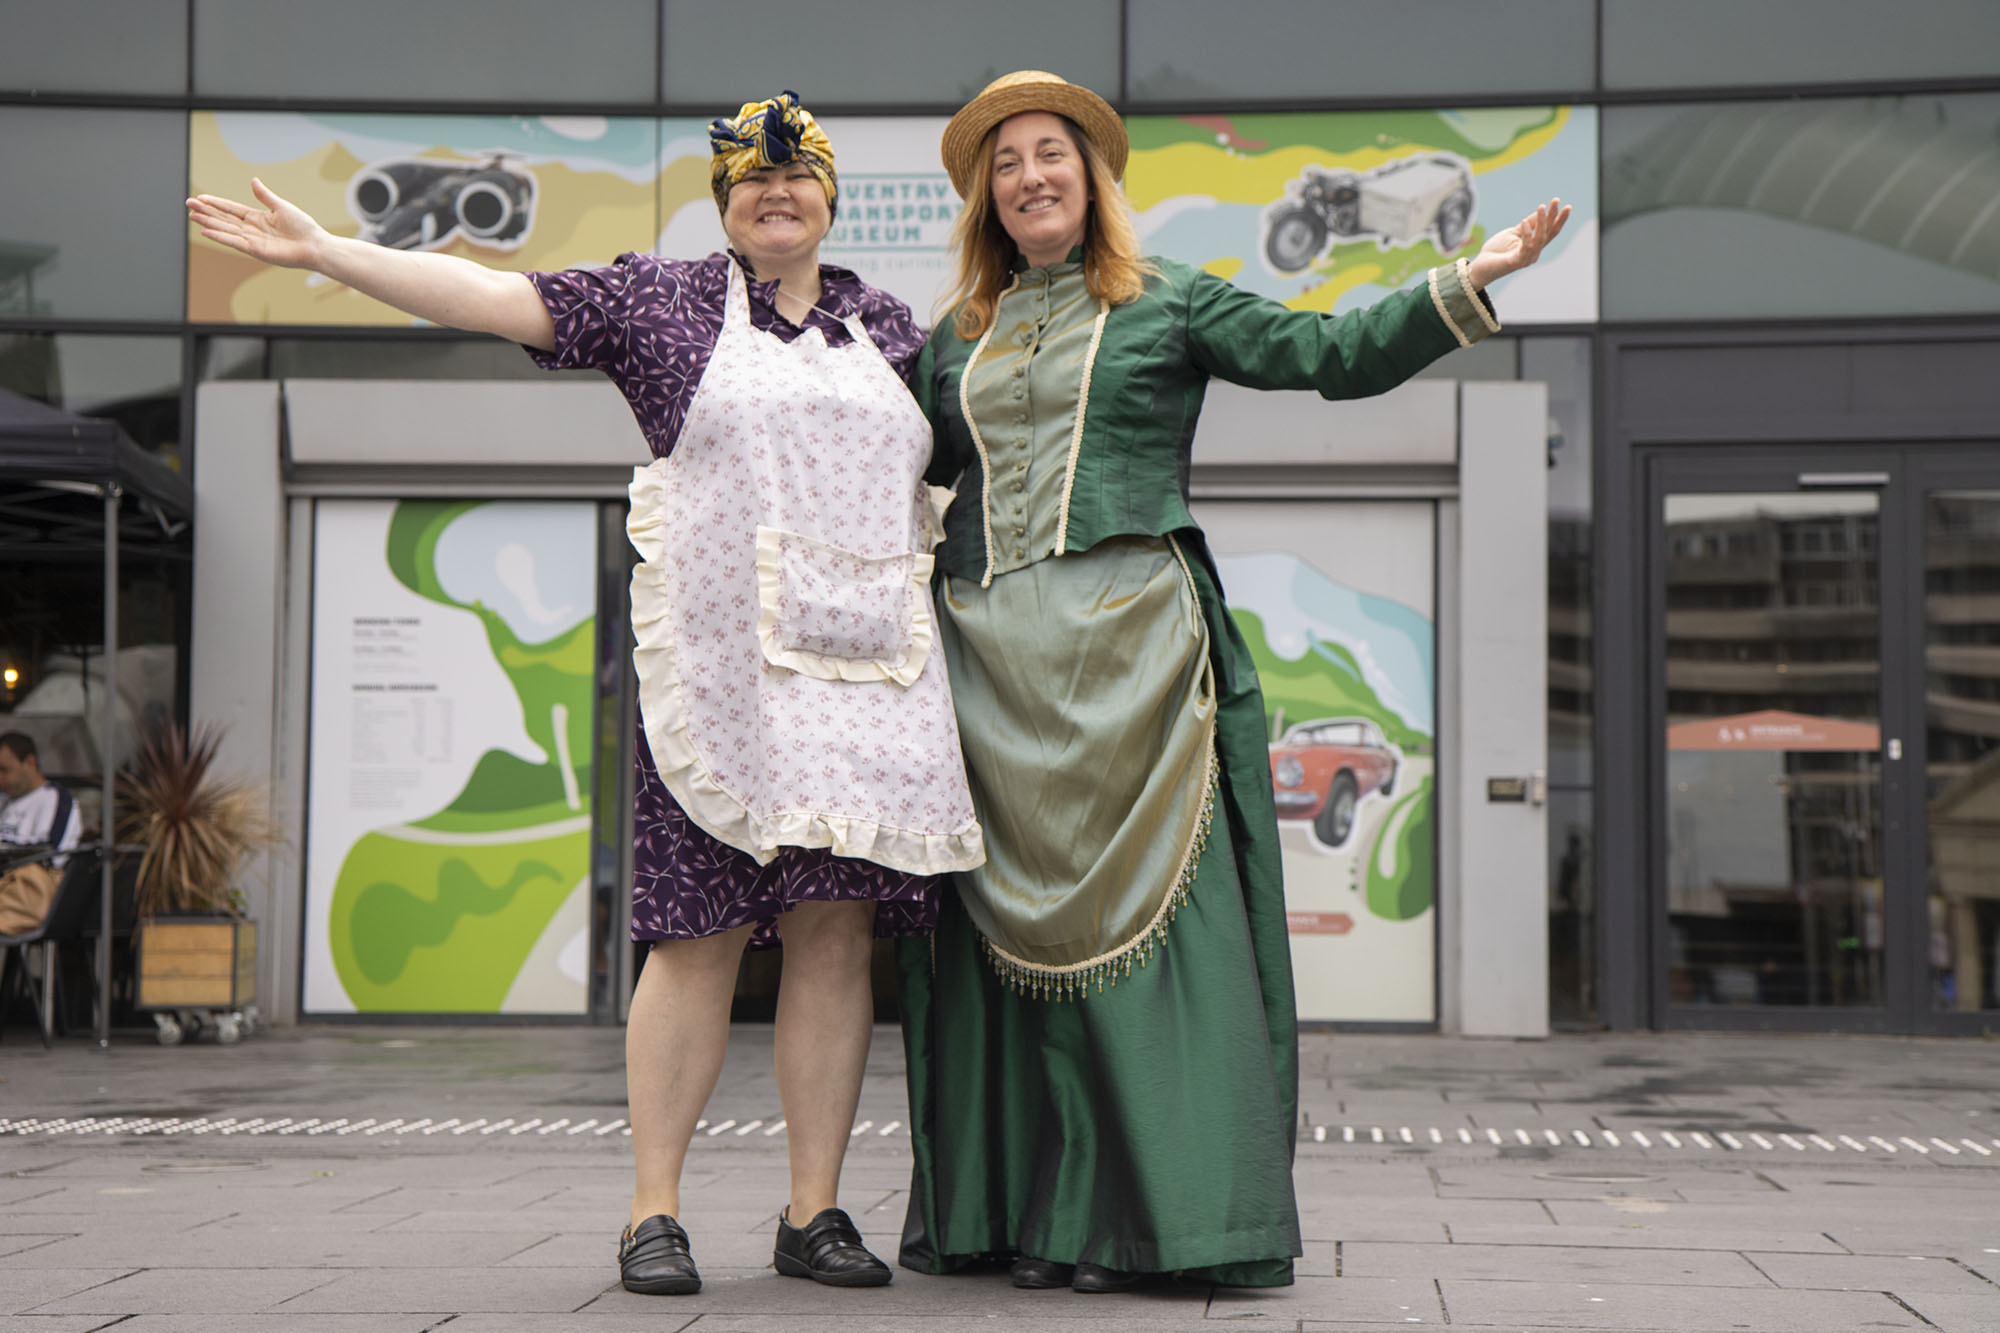 Two tour guides in costume standing outside Coventry Transport Museum with arms outstretched. The woman on the left is dressed in wartime attire, and the woman on the right is dressed as an Edwardian.